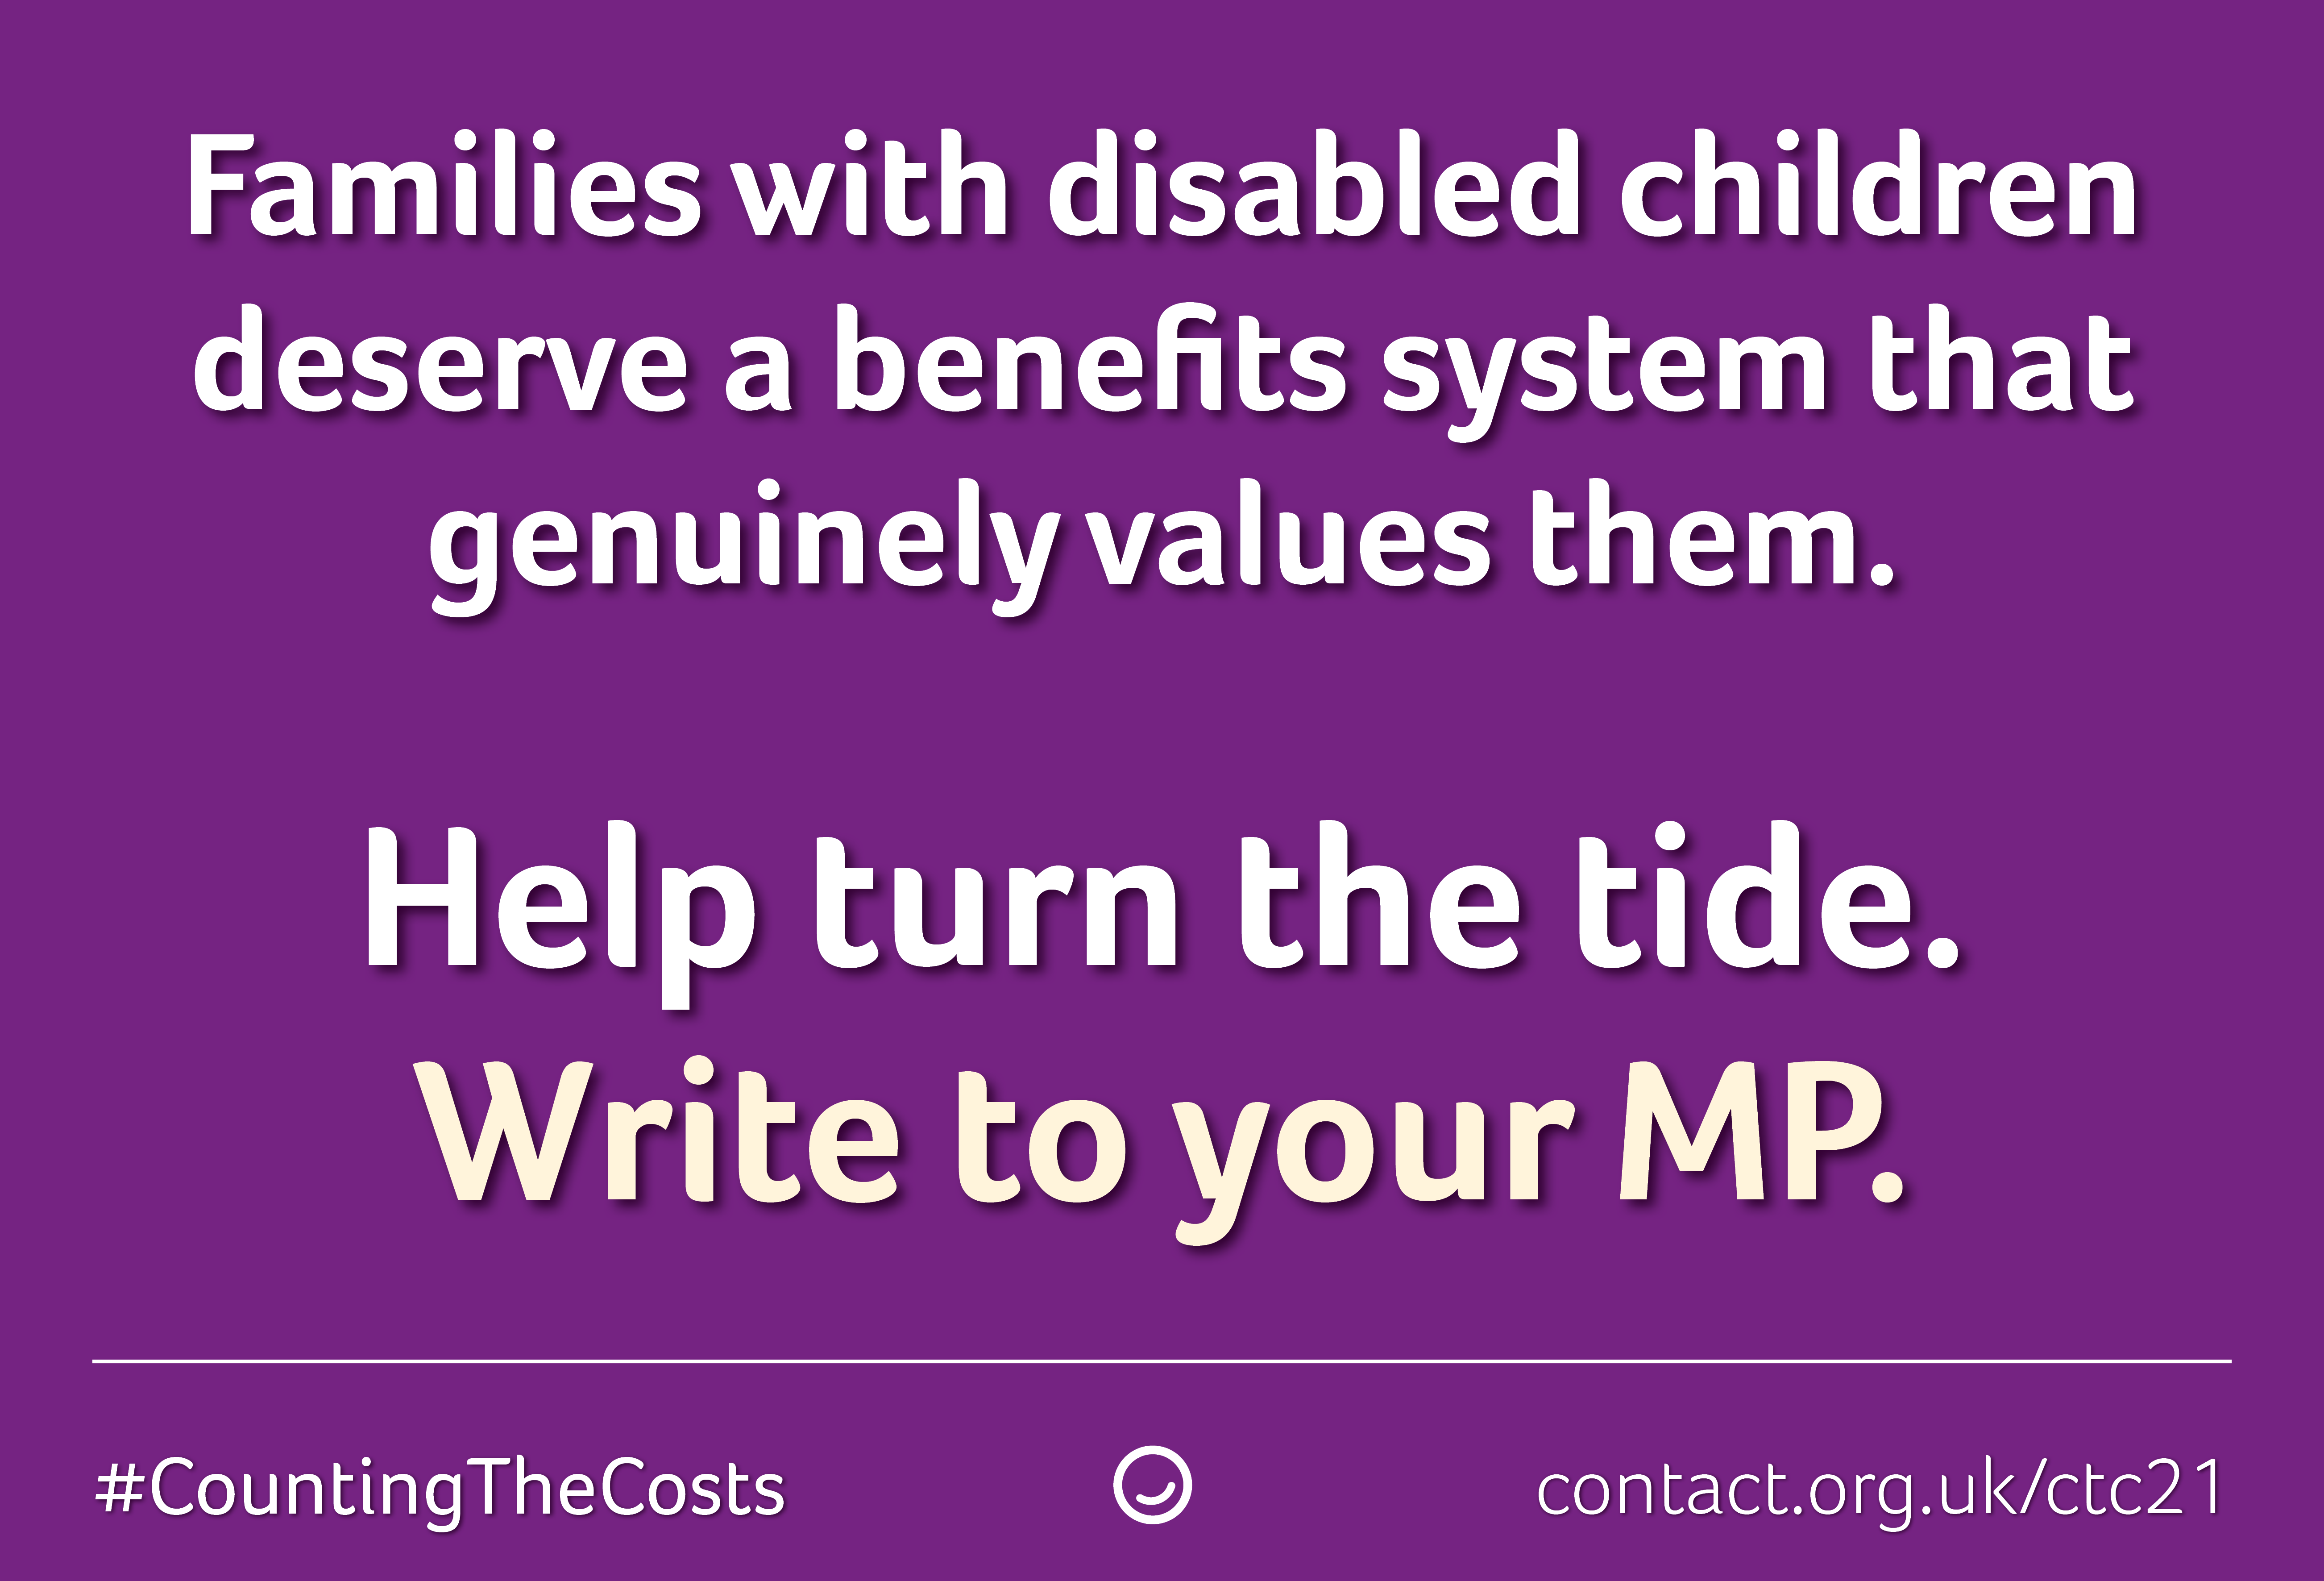 Purple banner with white text that says: "Families with disabled children deserve a benefits system that genuinely values them. Help turn the tide. Write to your MP."